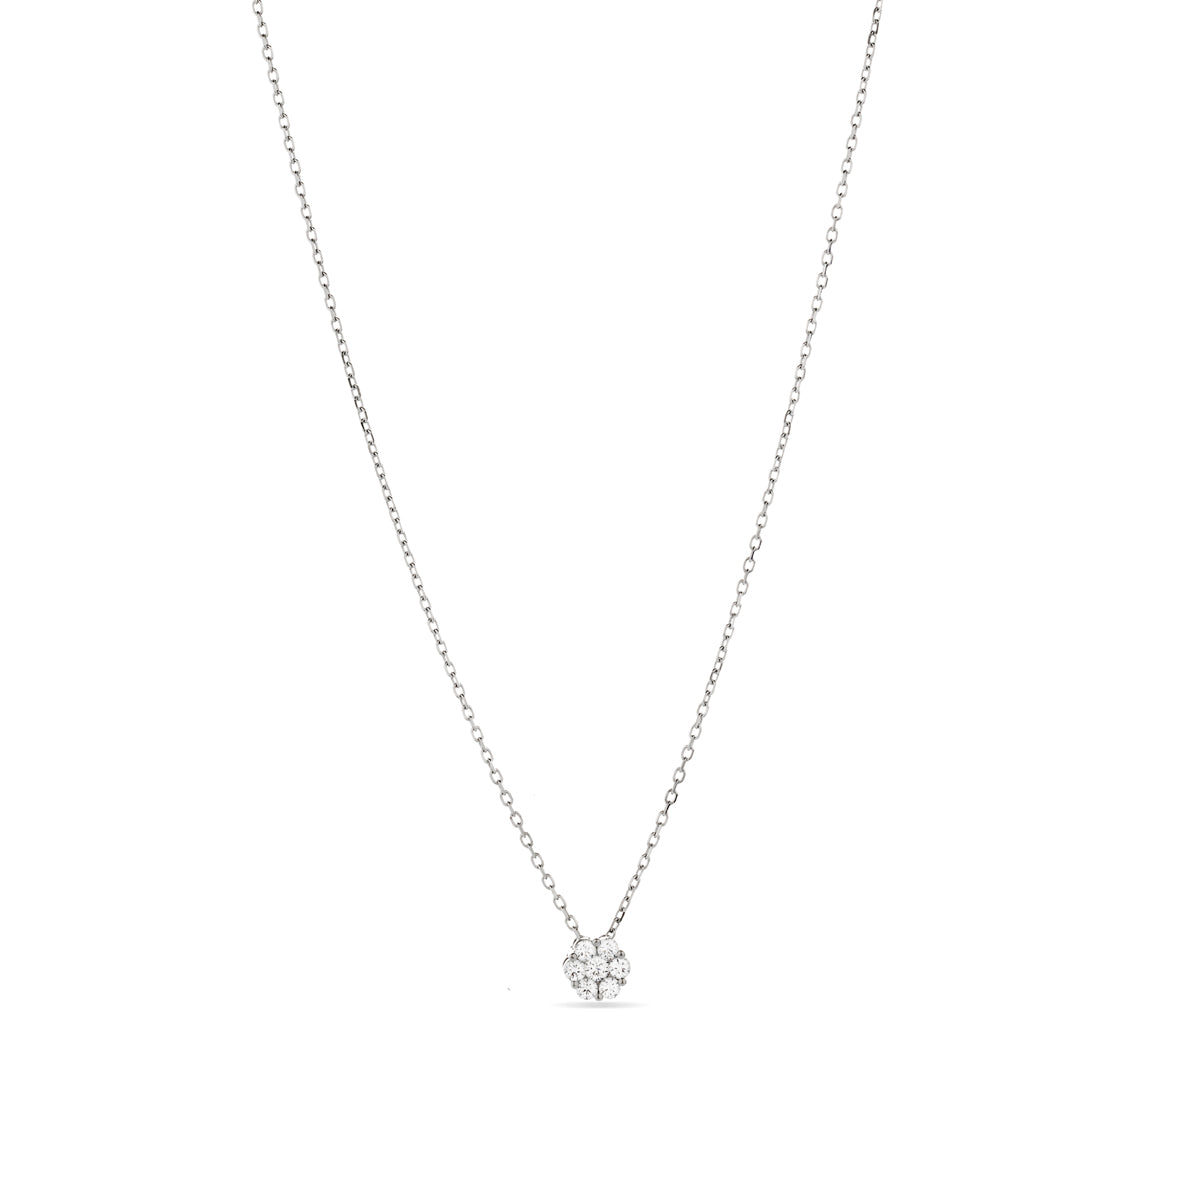 Tsein 925 Sterling Silver Necklace